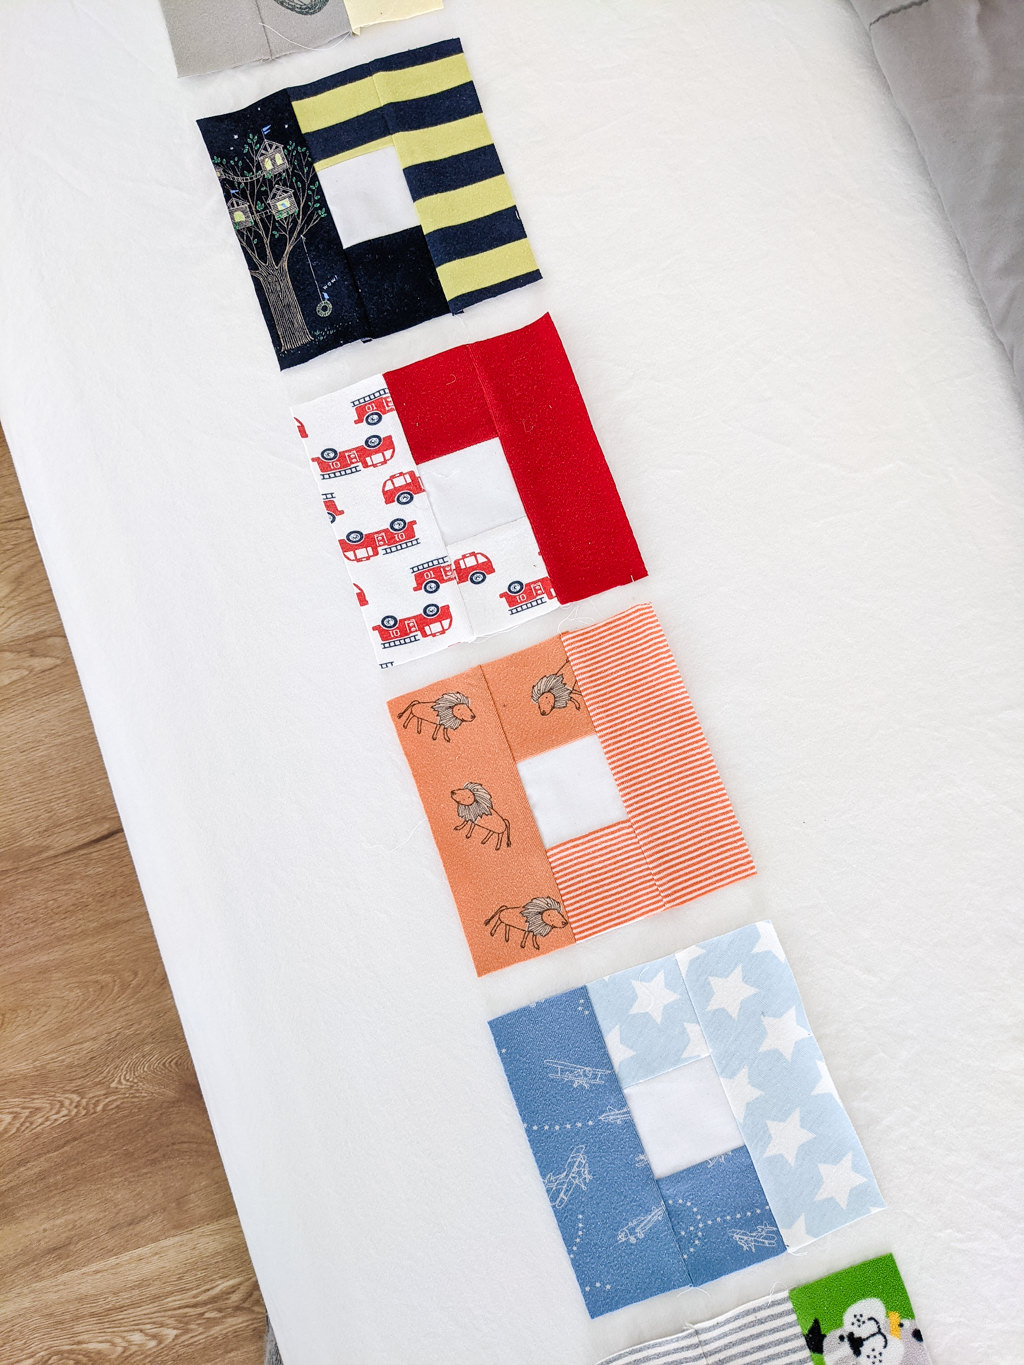 Double letter L-shaped quilt blocks from baby clothes